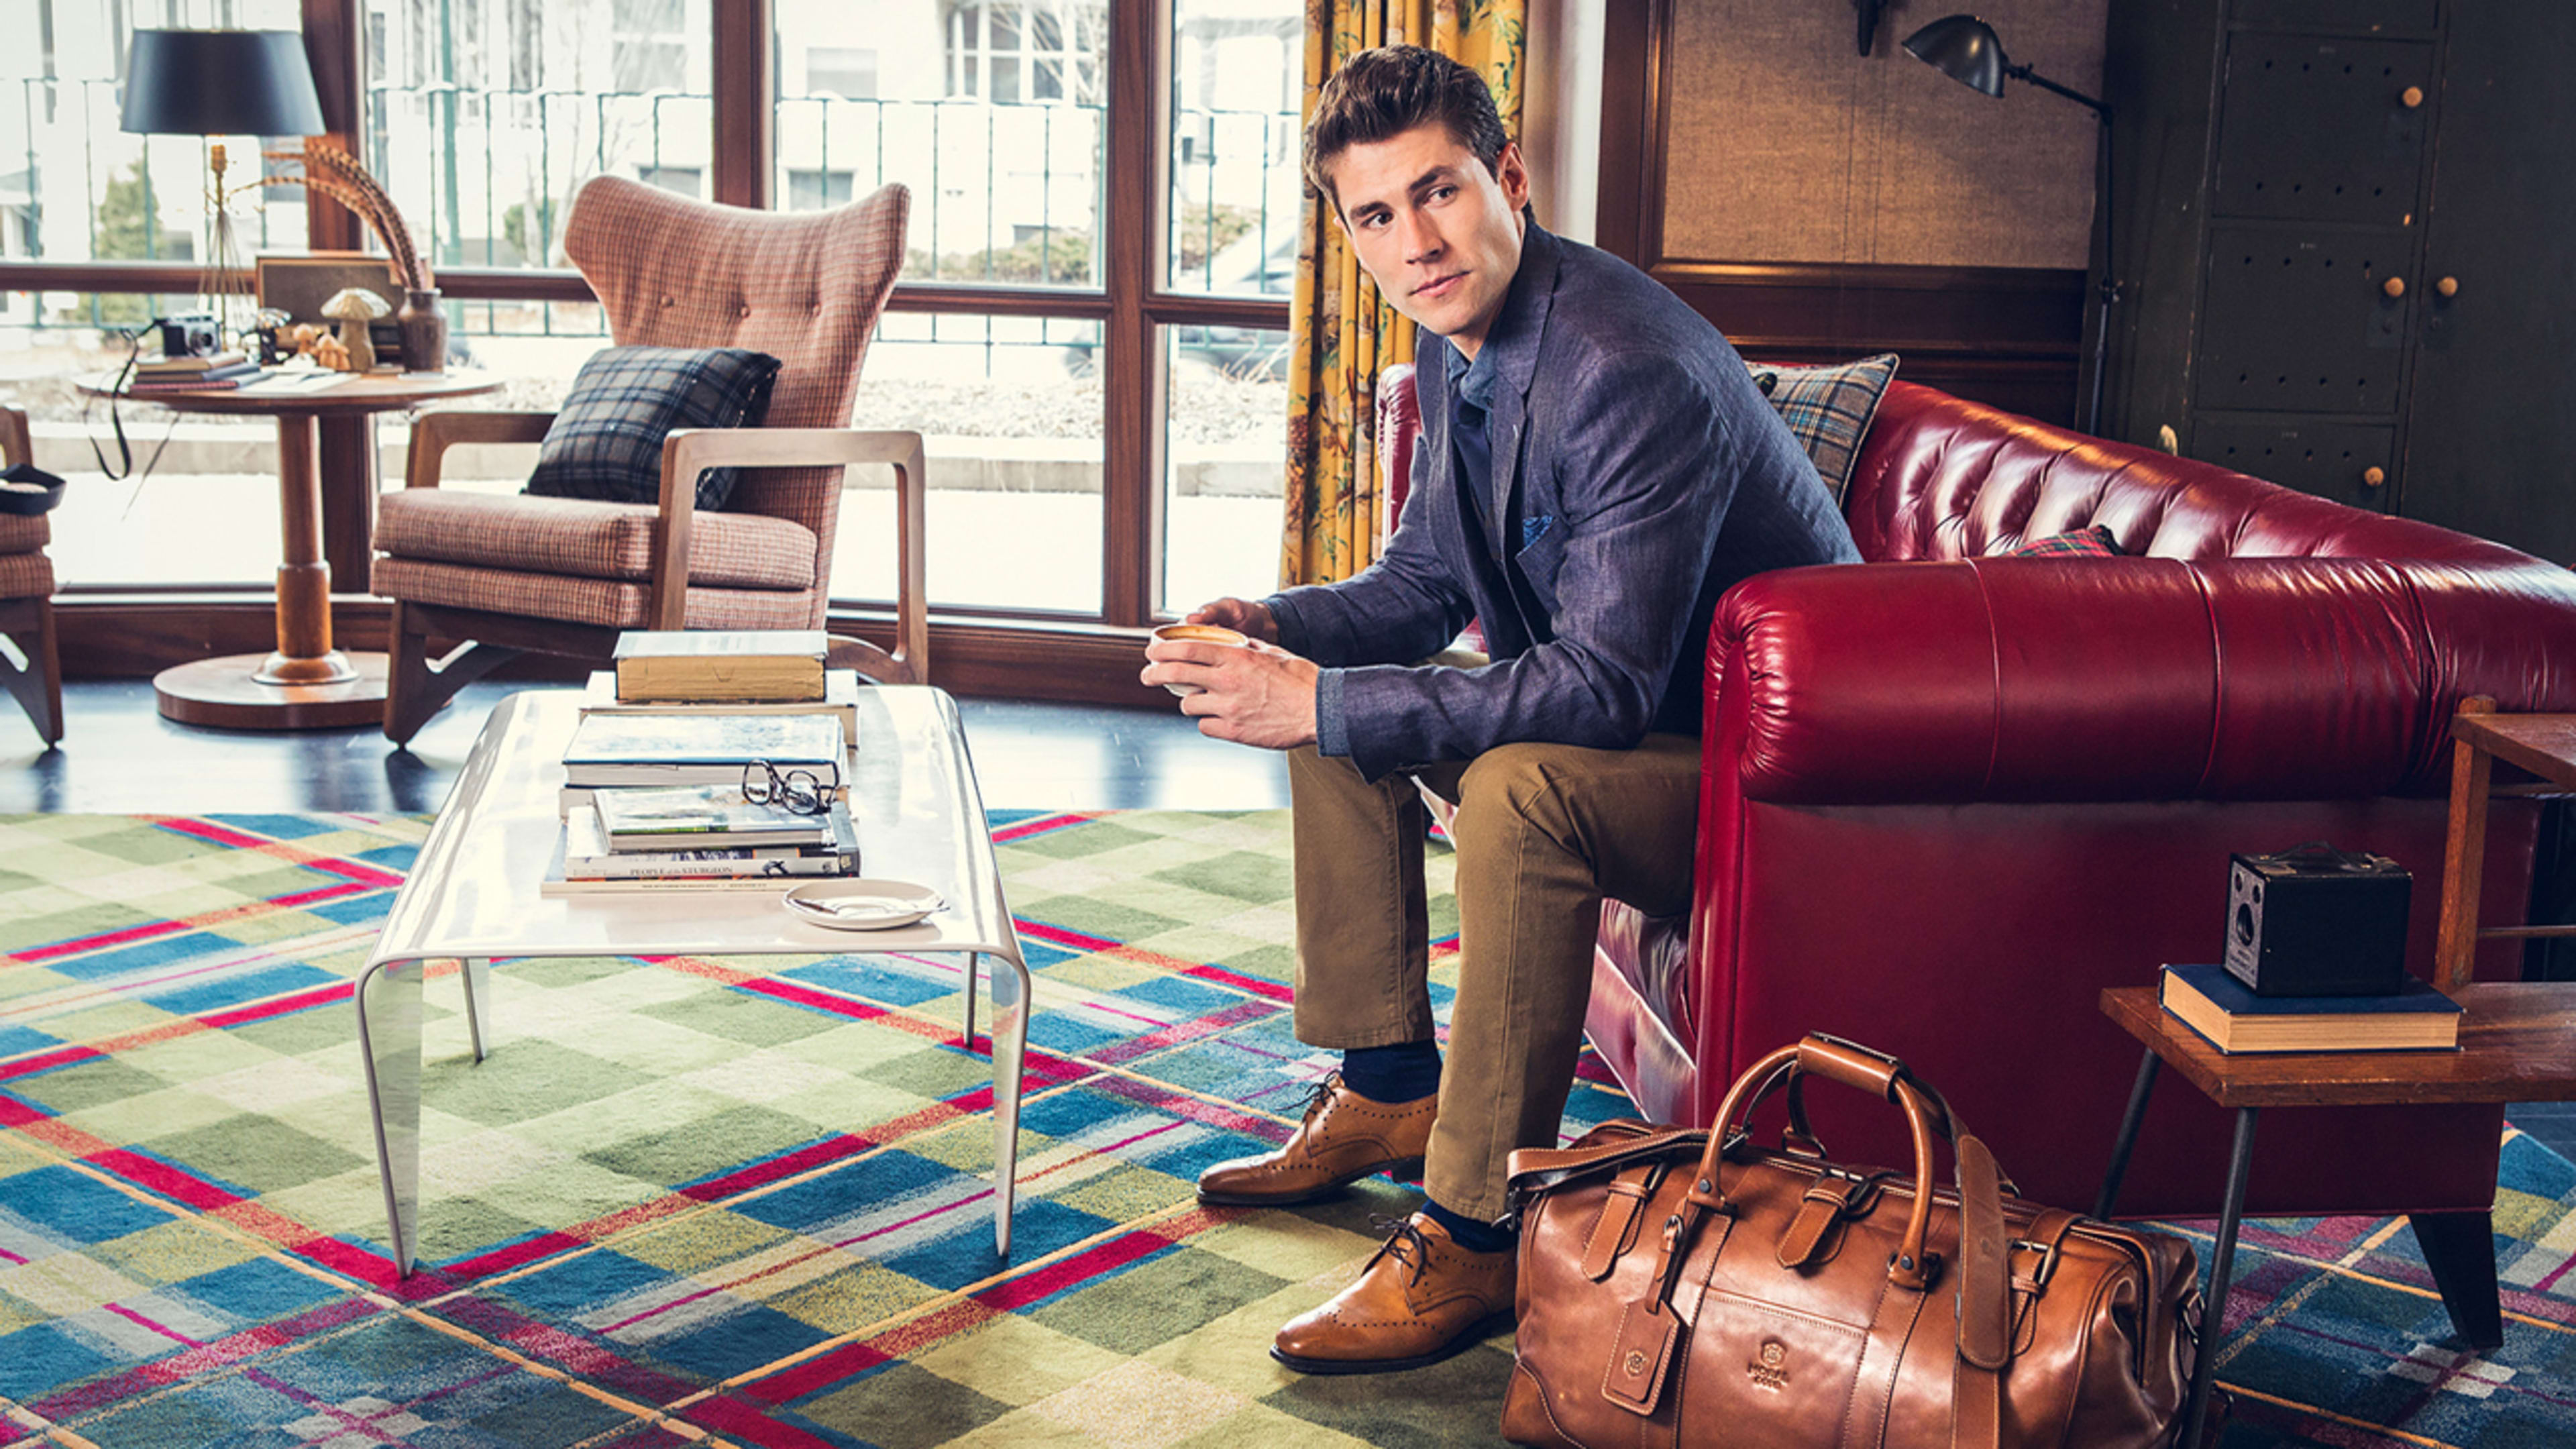 These footwear vets want to dress the “modern gentleman” with a Moral Code